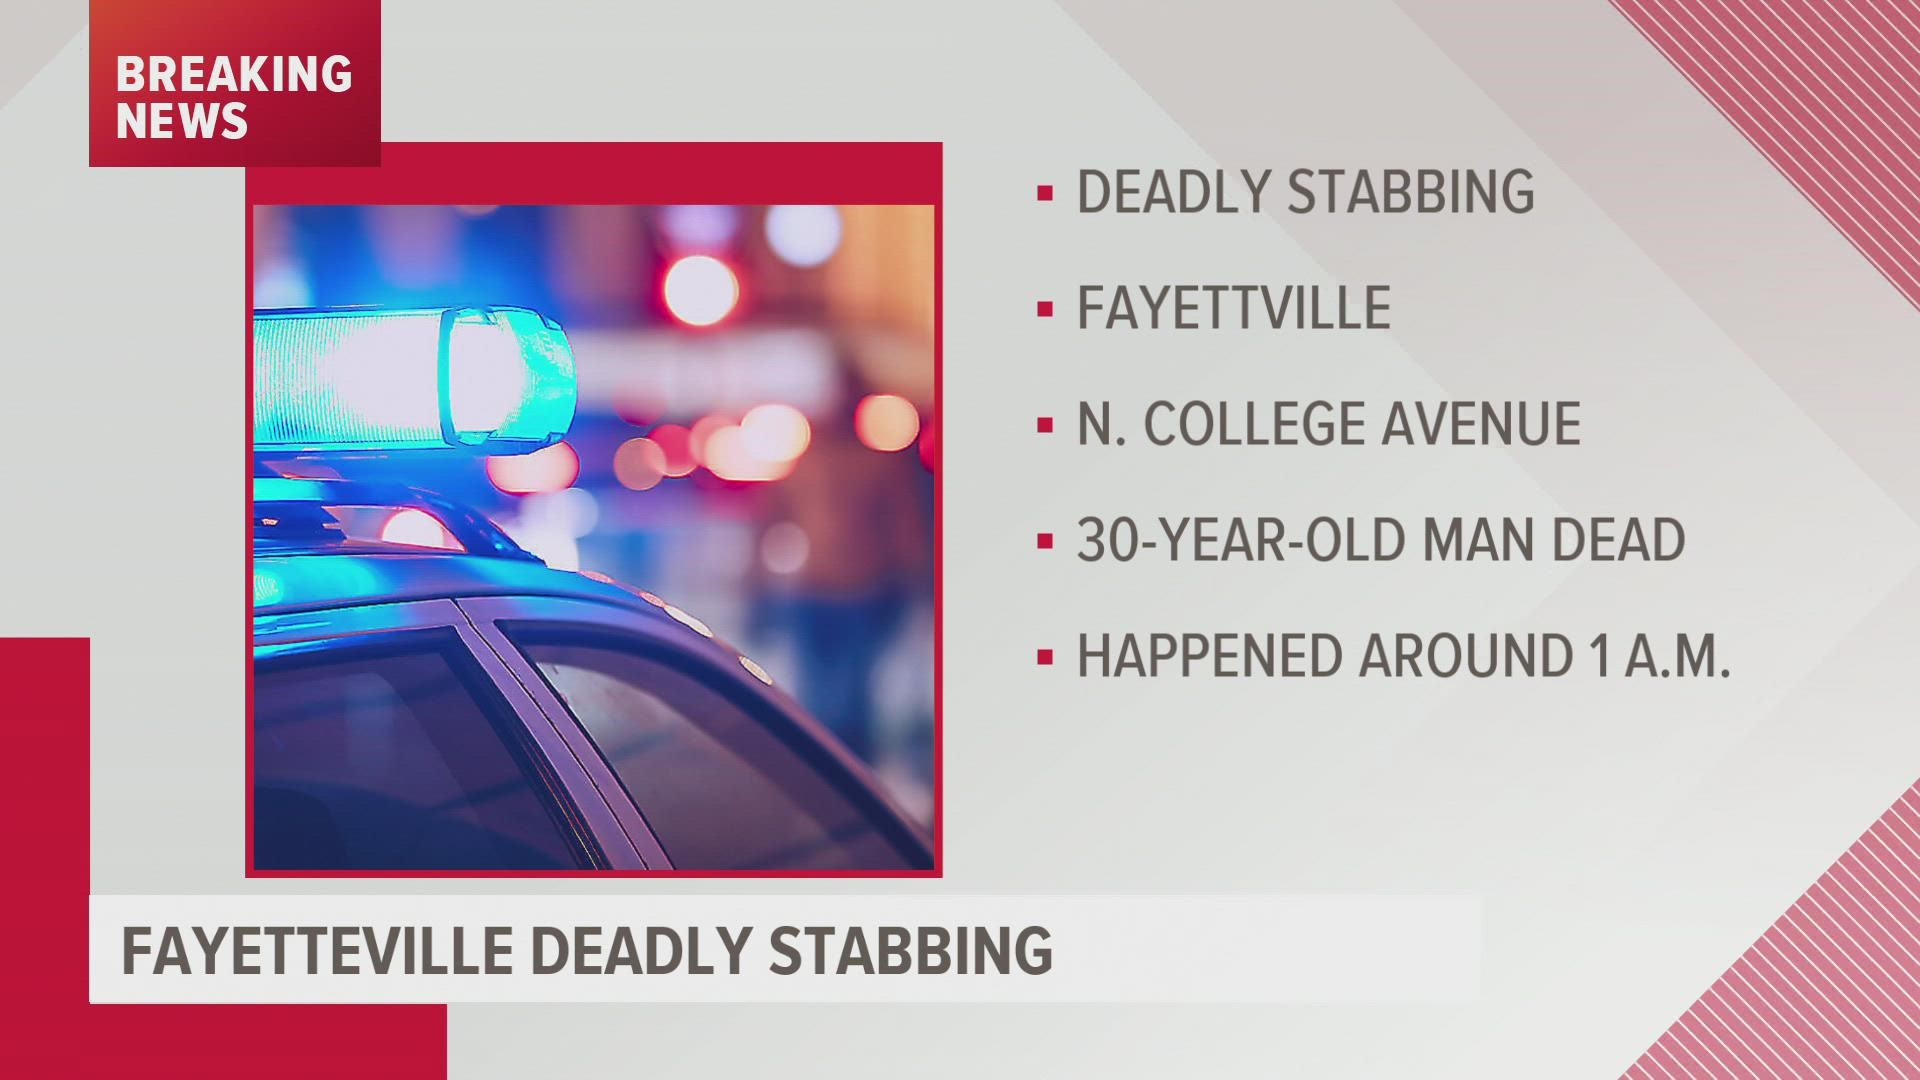 Police say a man is dead after a stabbing in Fayetteville early Christmas Eve morning.